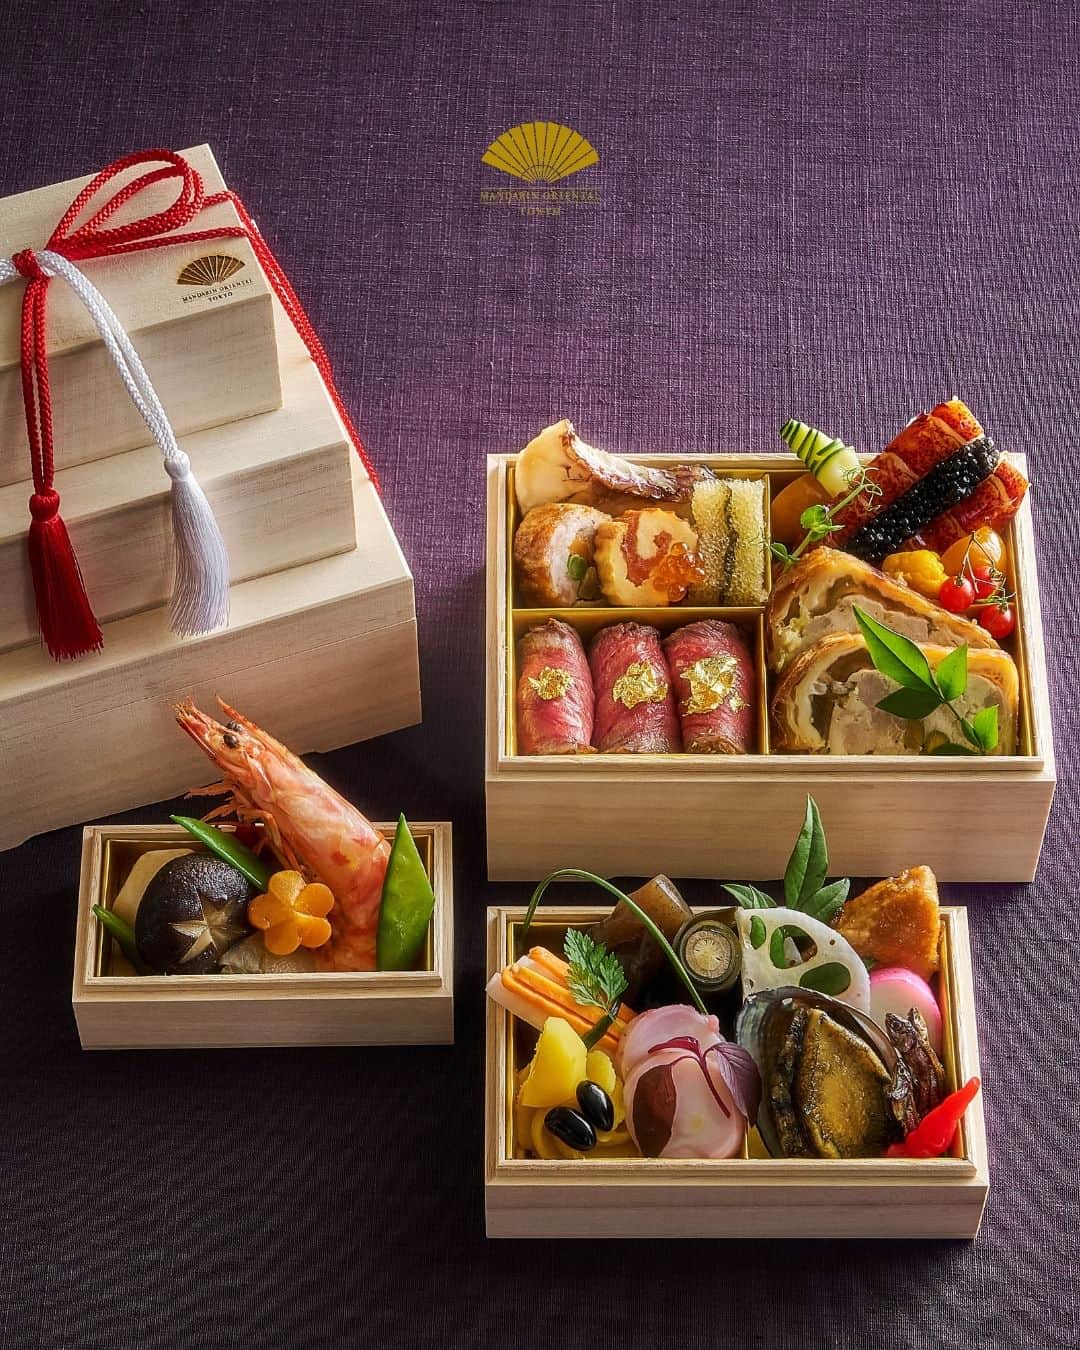 Mandarin Oriental, Tokyoのインスタグラム：「Celebrate the New Year with our exquisite single-serving Japanese-Western fusion Osechi, traditional Japanese New Year delicacy, presented in a three-tiered arrangement. Delight in classic offerings that incorporate traditional New Year's "lucky charms", such as lobster and abalone confit, alongside chef-curated specialties like Tochigi prefecture's gold leaf-infused beef roast and the exquisite Yawatamaki featuring rare Premium Pork from Iwate prefecture.  Enjoy a luxurious start to the new year with our mouthwatering Osechi.  毎年人気の、お一人さまからお楽しみいただける三段重箱入り和洋折衷のおせち。 新年の始まりに相応しく、オマール海老や鮑のコンフィなどの伝統的なおせちの縁起物を取り入れた一品から、金箔をあしらった栃木県産の国産牛ローストや岩手県産の希少なプラチナポークで作る、八幡巻きなど、一品一品心を込めてご用意しました。 彩り豊かな味わいを楽しめる贅沢なおせちで、2024年をスタートしてみませんか。 … Mandarin Oriental, Tokyo @mo_tokyo  #MandarinOrientalTokyo #MOtokyo #ImAFan #MandarinOriental #Nihonbashi #osechi #Japansenewyear  #osechi #マンダリンオリエンタル #マンダリンオリエンタル東京 #東京ホテル #日本橋 #日本橋ホテル #おせち #お正月」